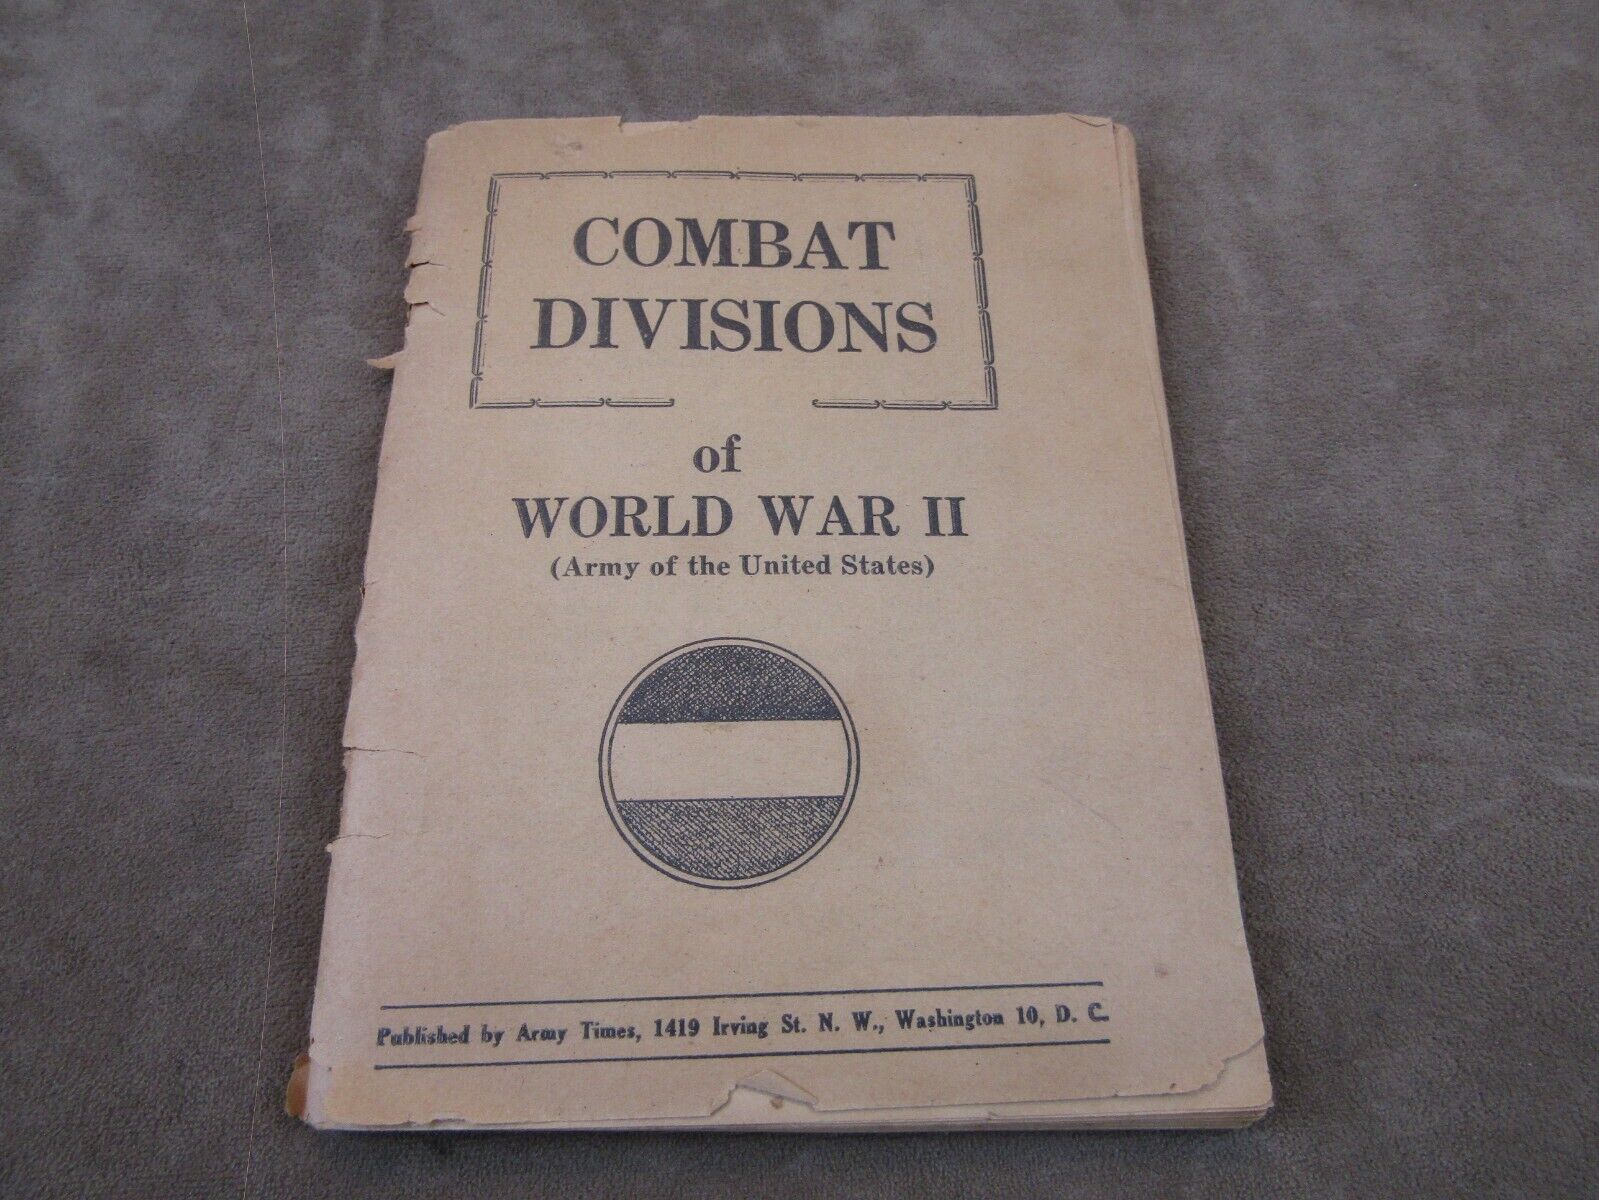 VINTAGE ARMY TIMES 1946 US COMBAT DIVISIONS OF WORLD WAR II WWII BOOK